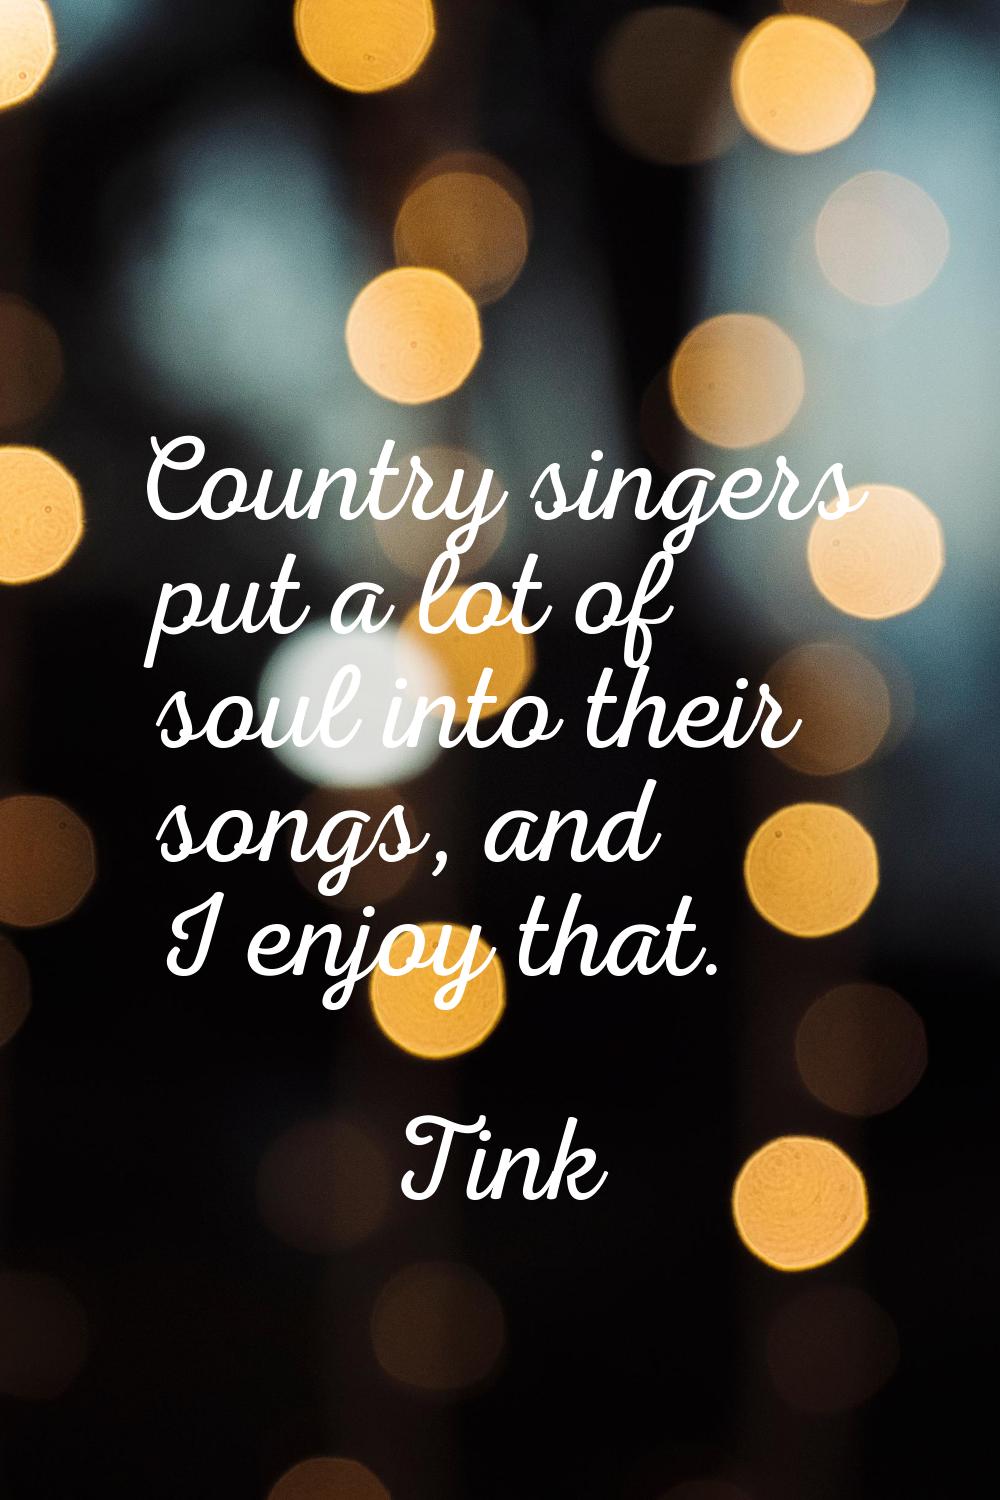 Country singers put a lot of soul into their songs, and I enjoy that.